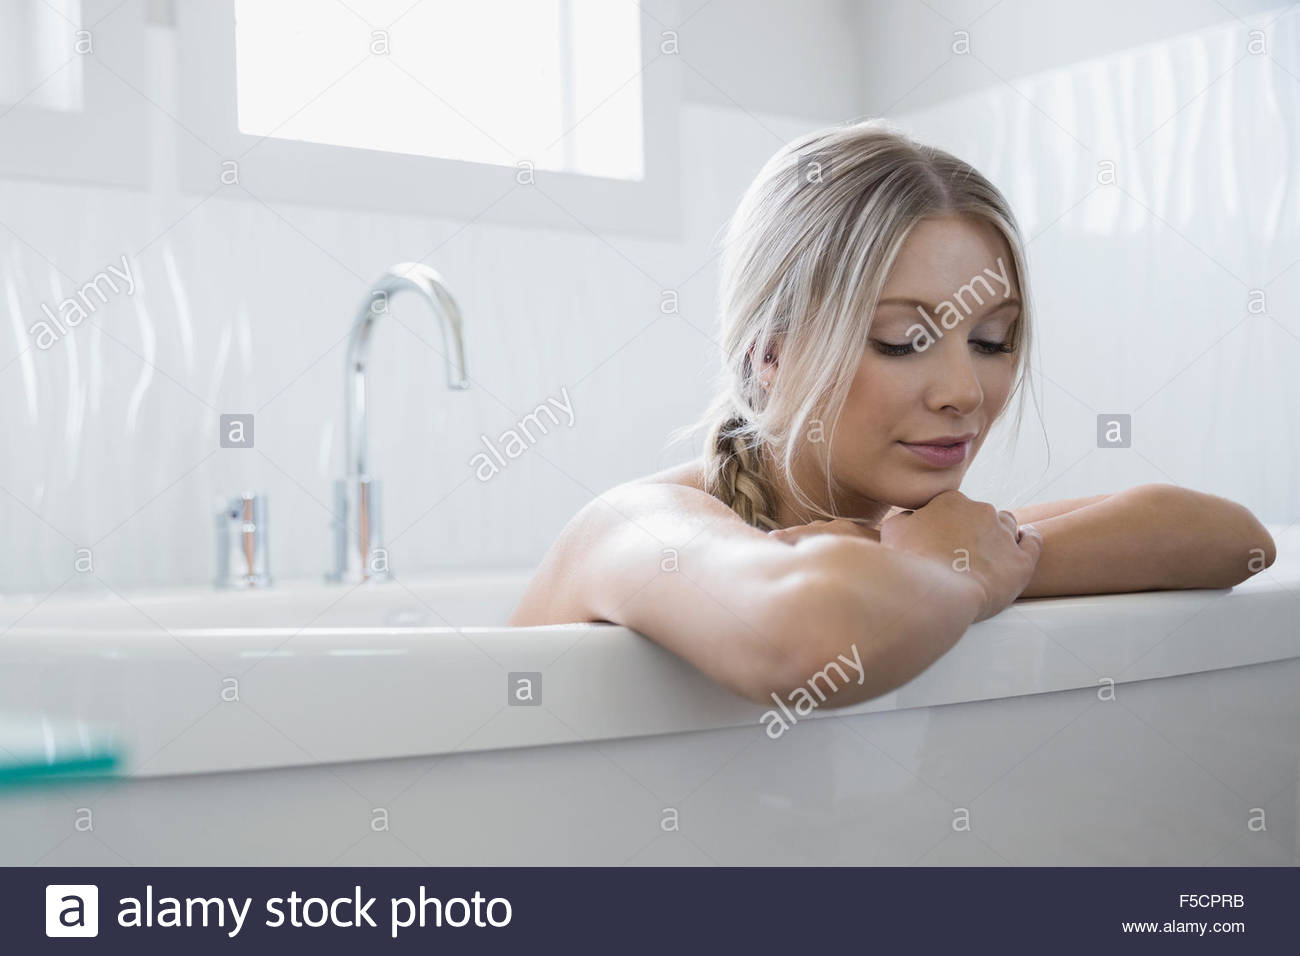 Calm woman relaxing in bathtub Banque D'Images